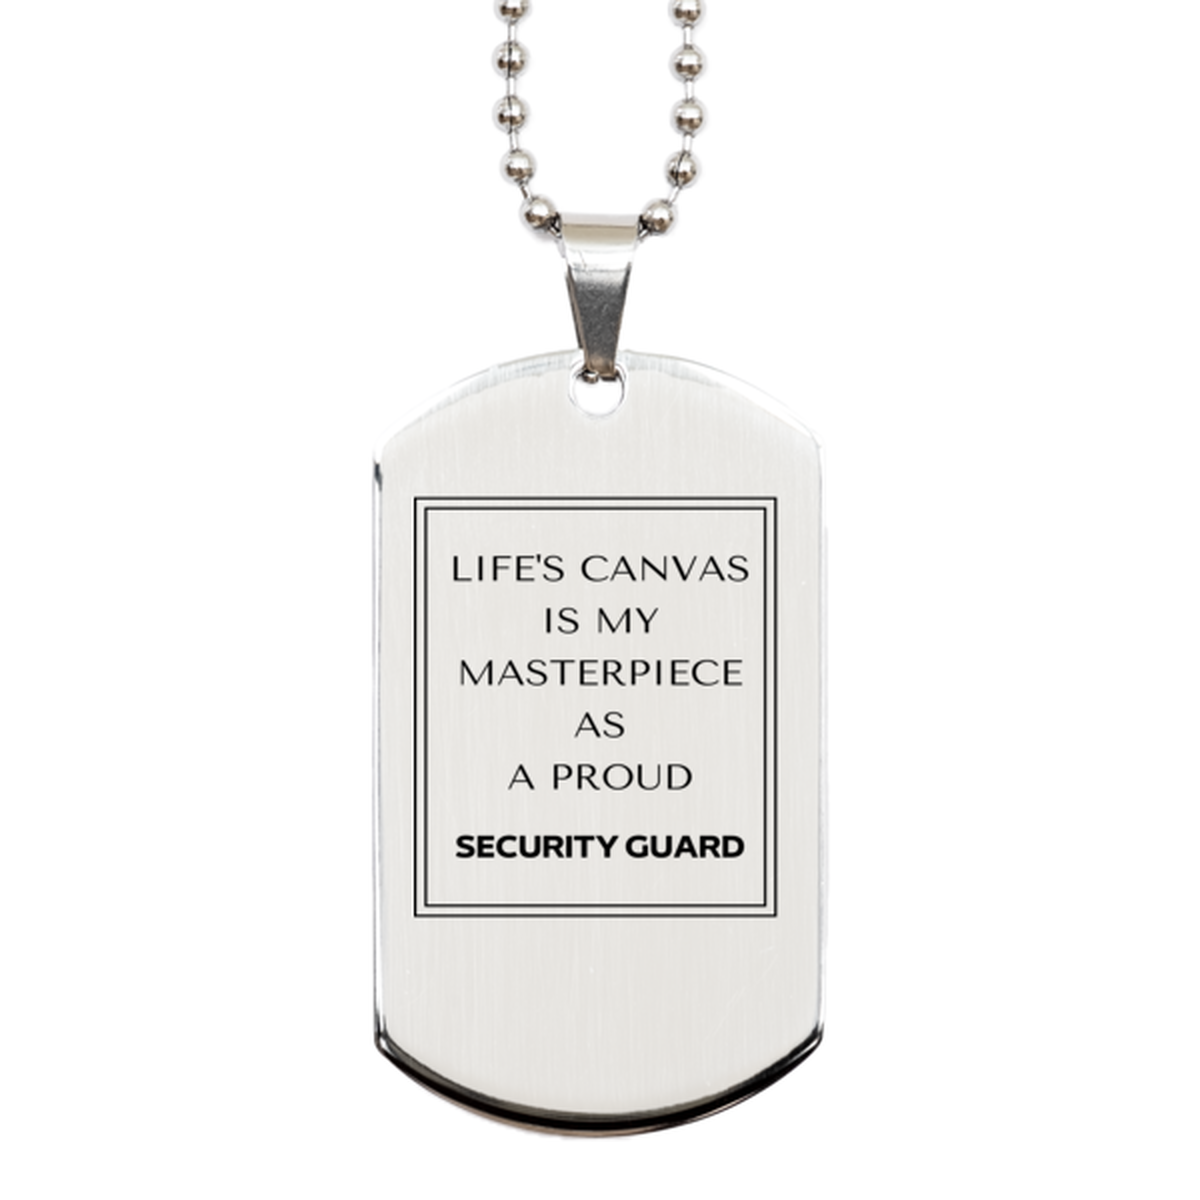 Proud Security Guard Gifts, Life's canvas is my masterpiece, Epic Birthday Christmas Unique Silver Dog Tag For Security Guard, Coworkers, Men, Women, Friends